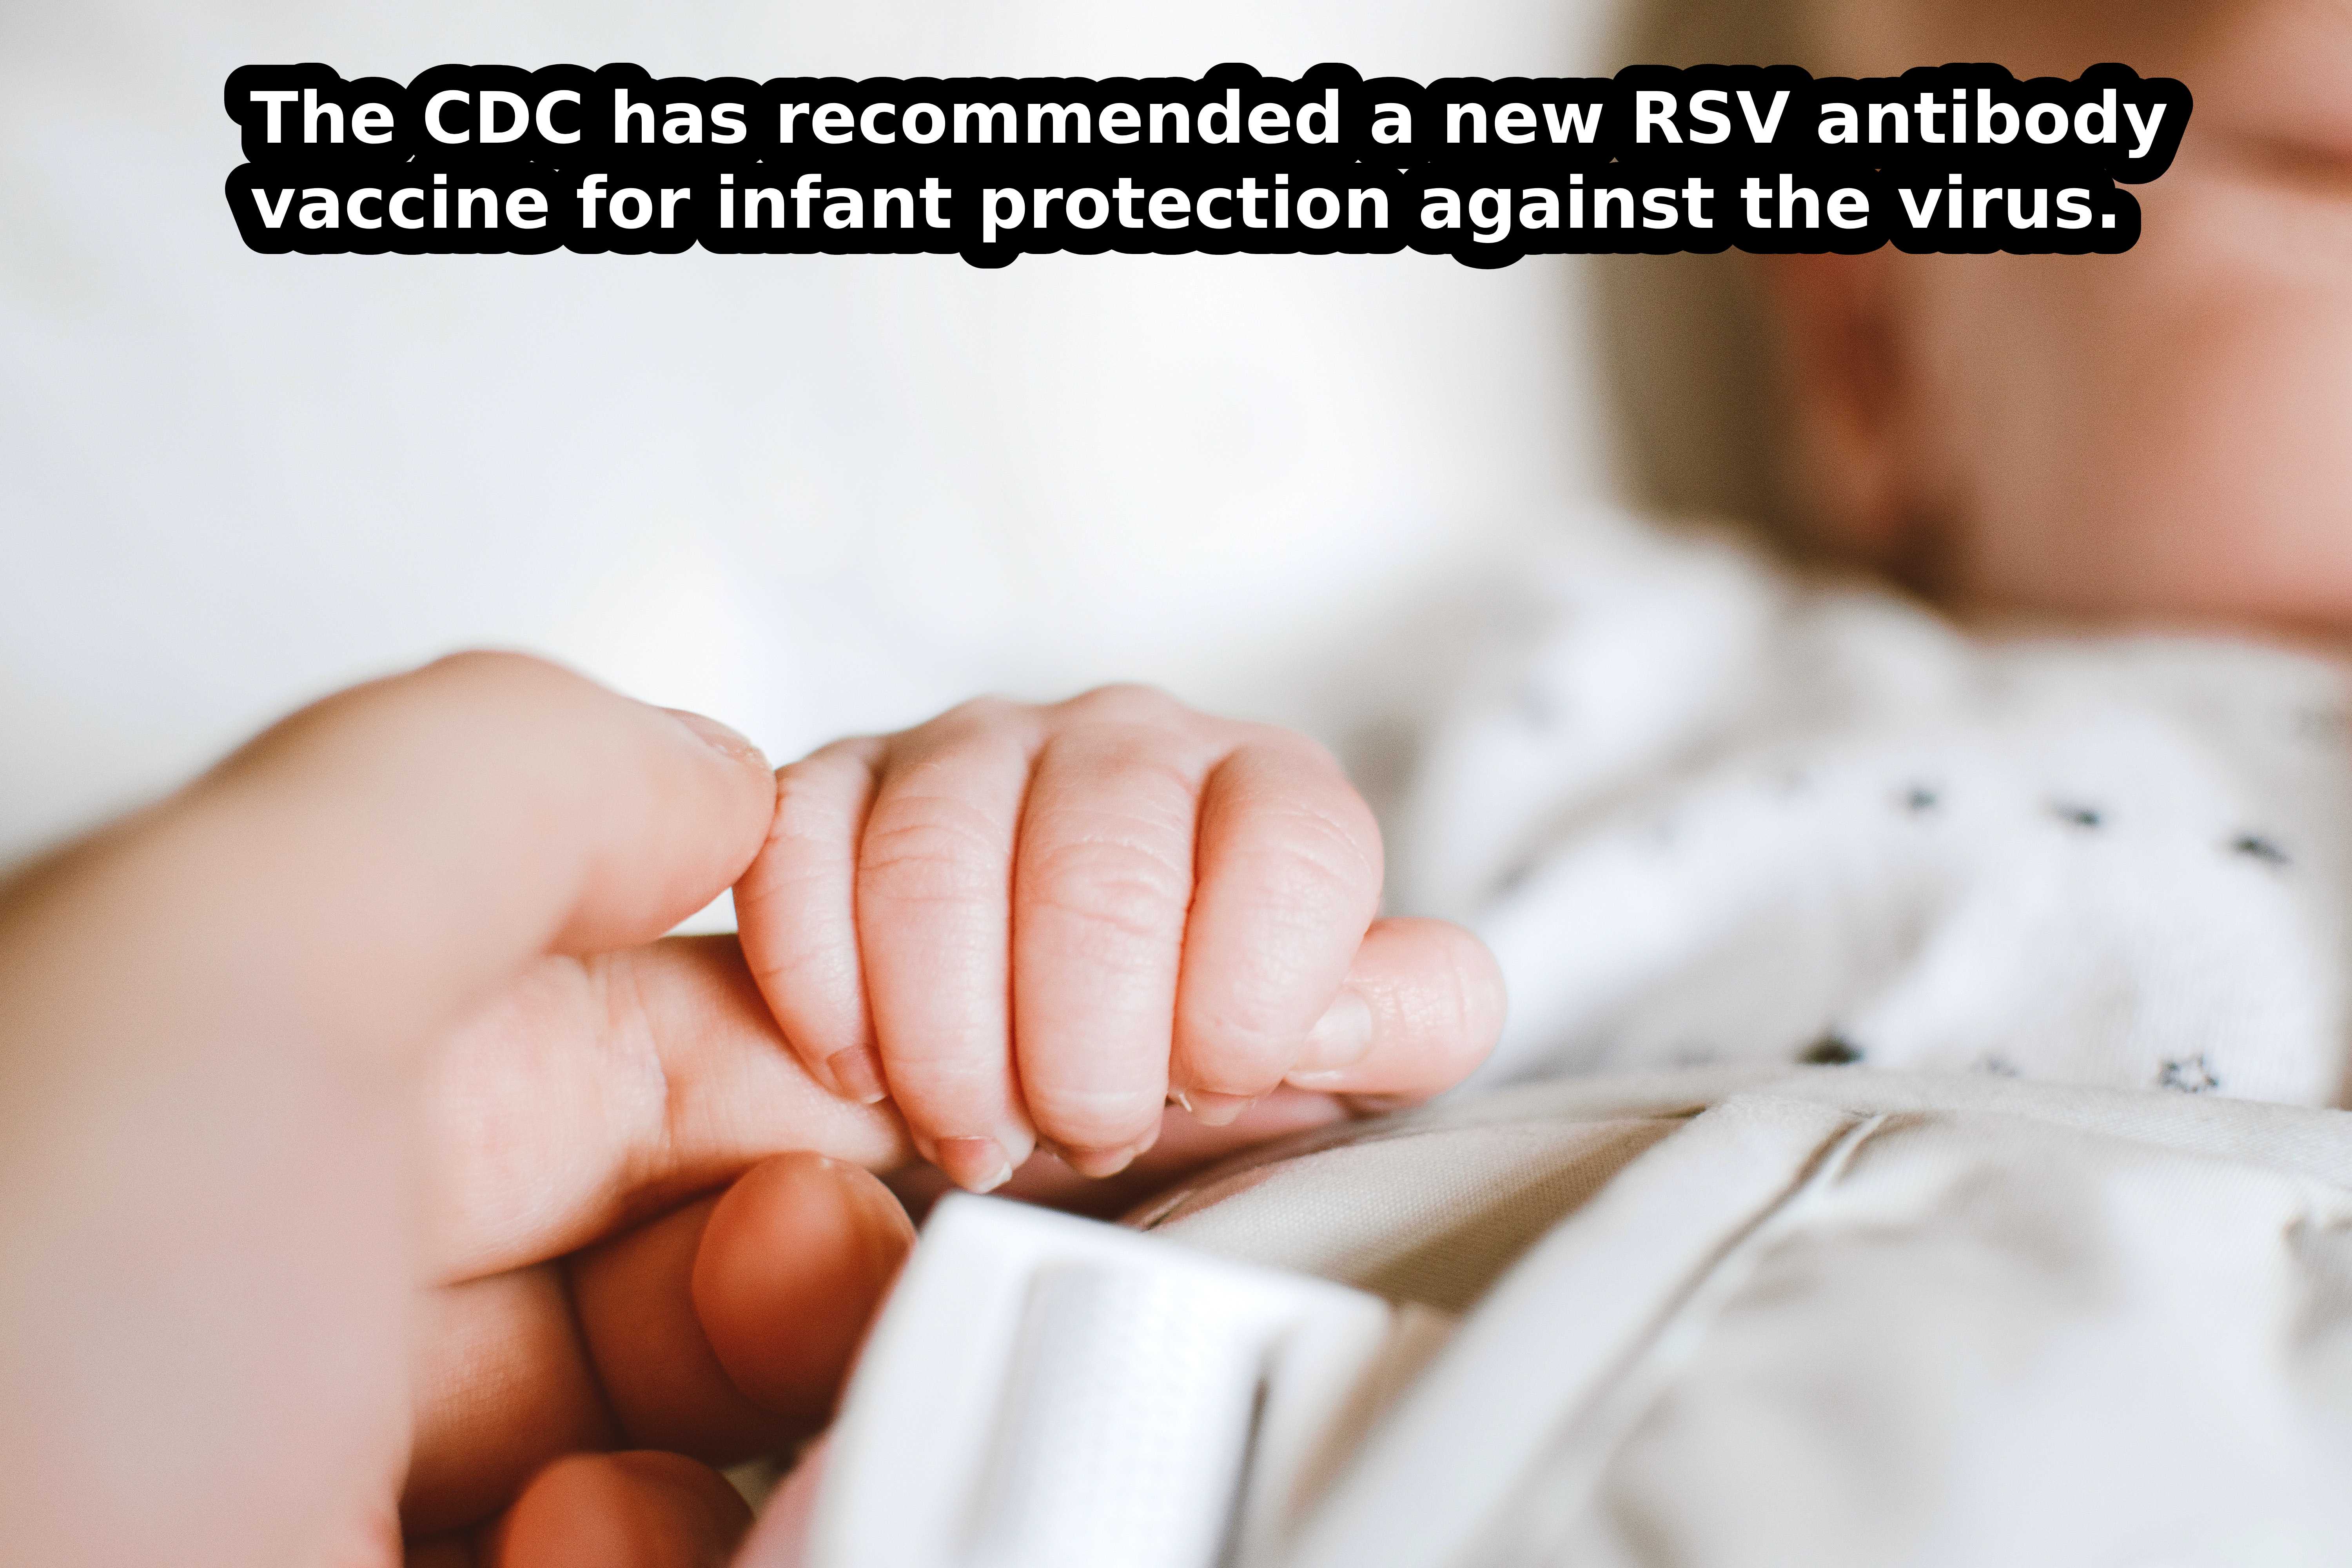 The CDC has recommended a new RSV antibody vaccine for infant protection against the virus